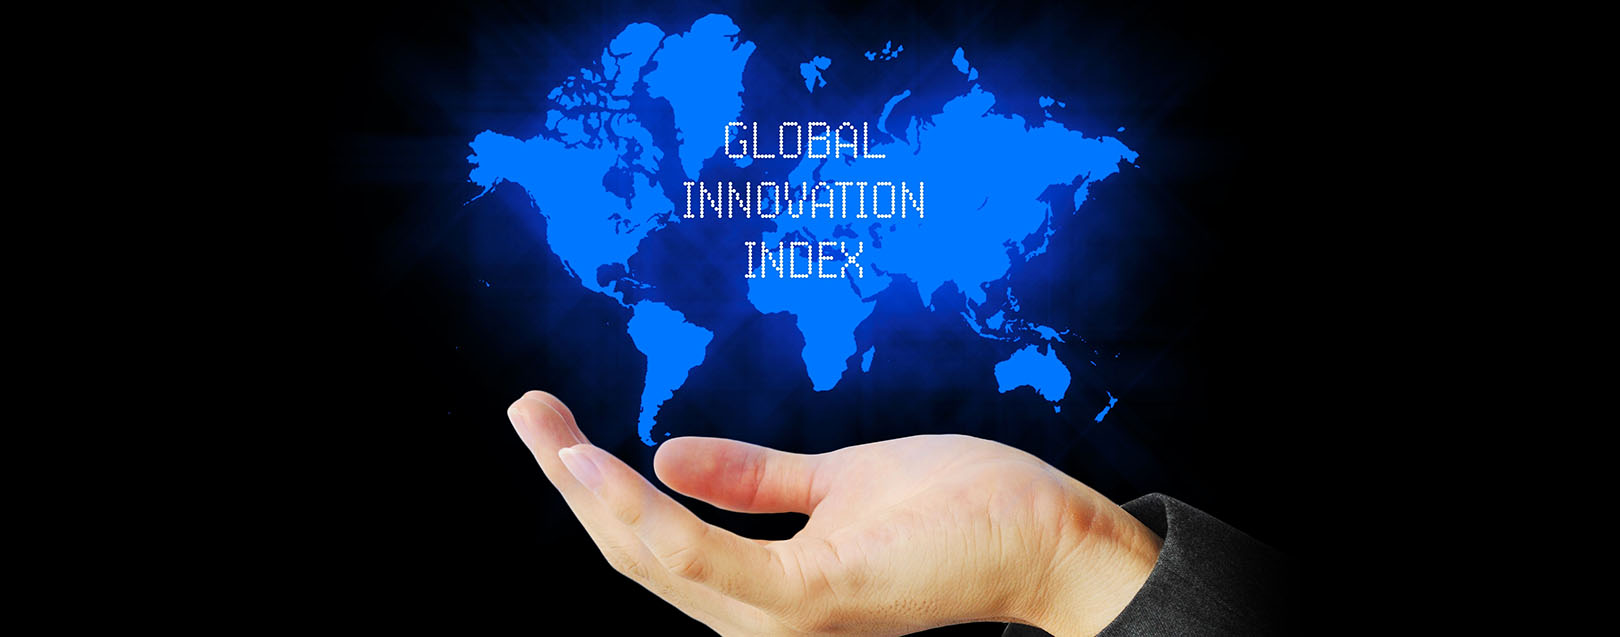 India ranks 43 out of 45 nations in global innovation index